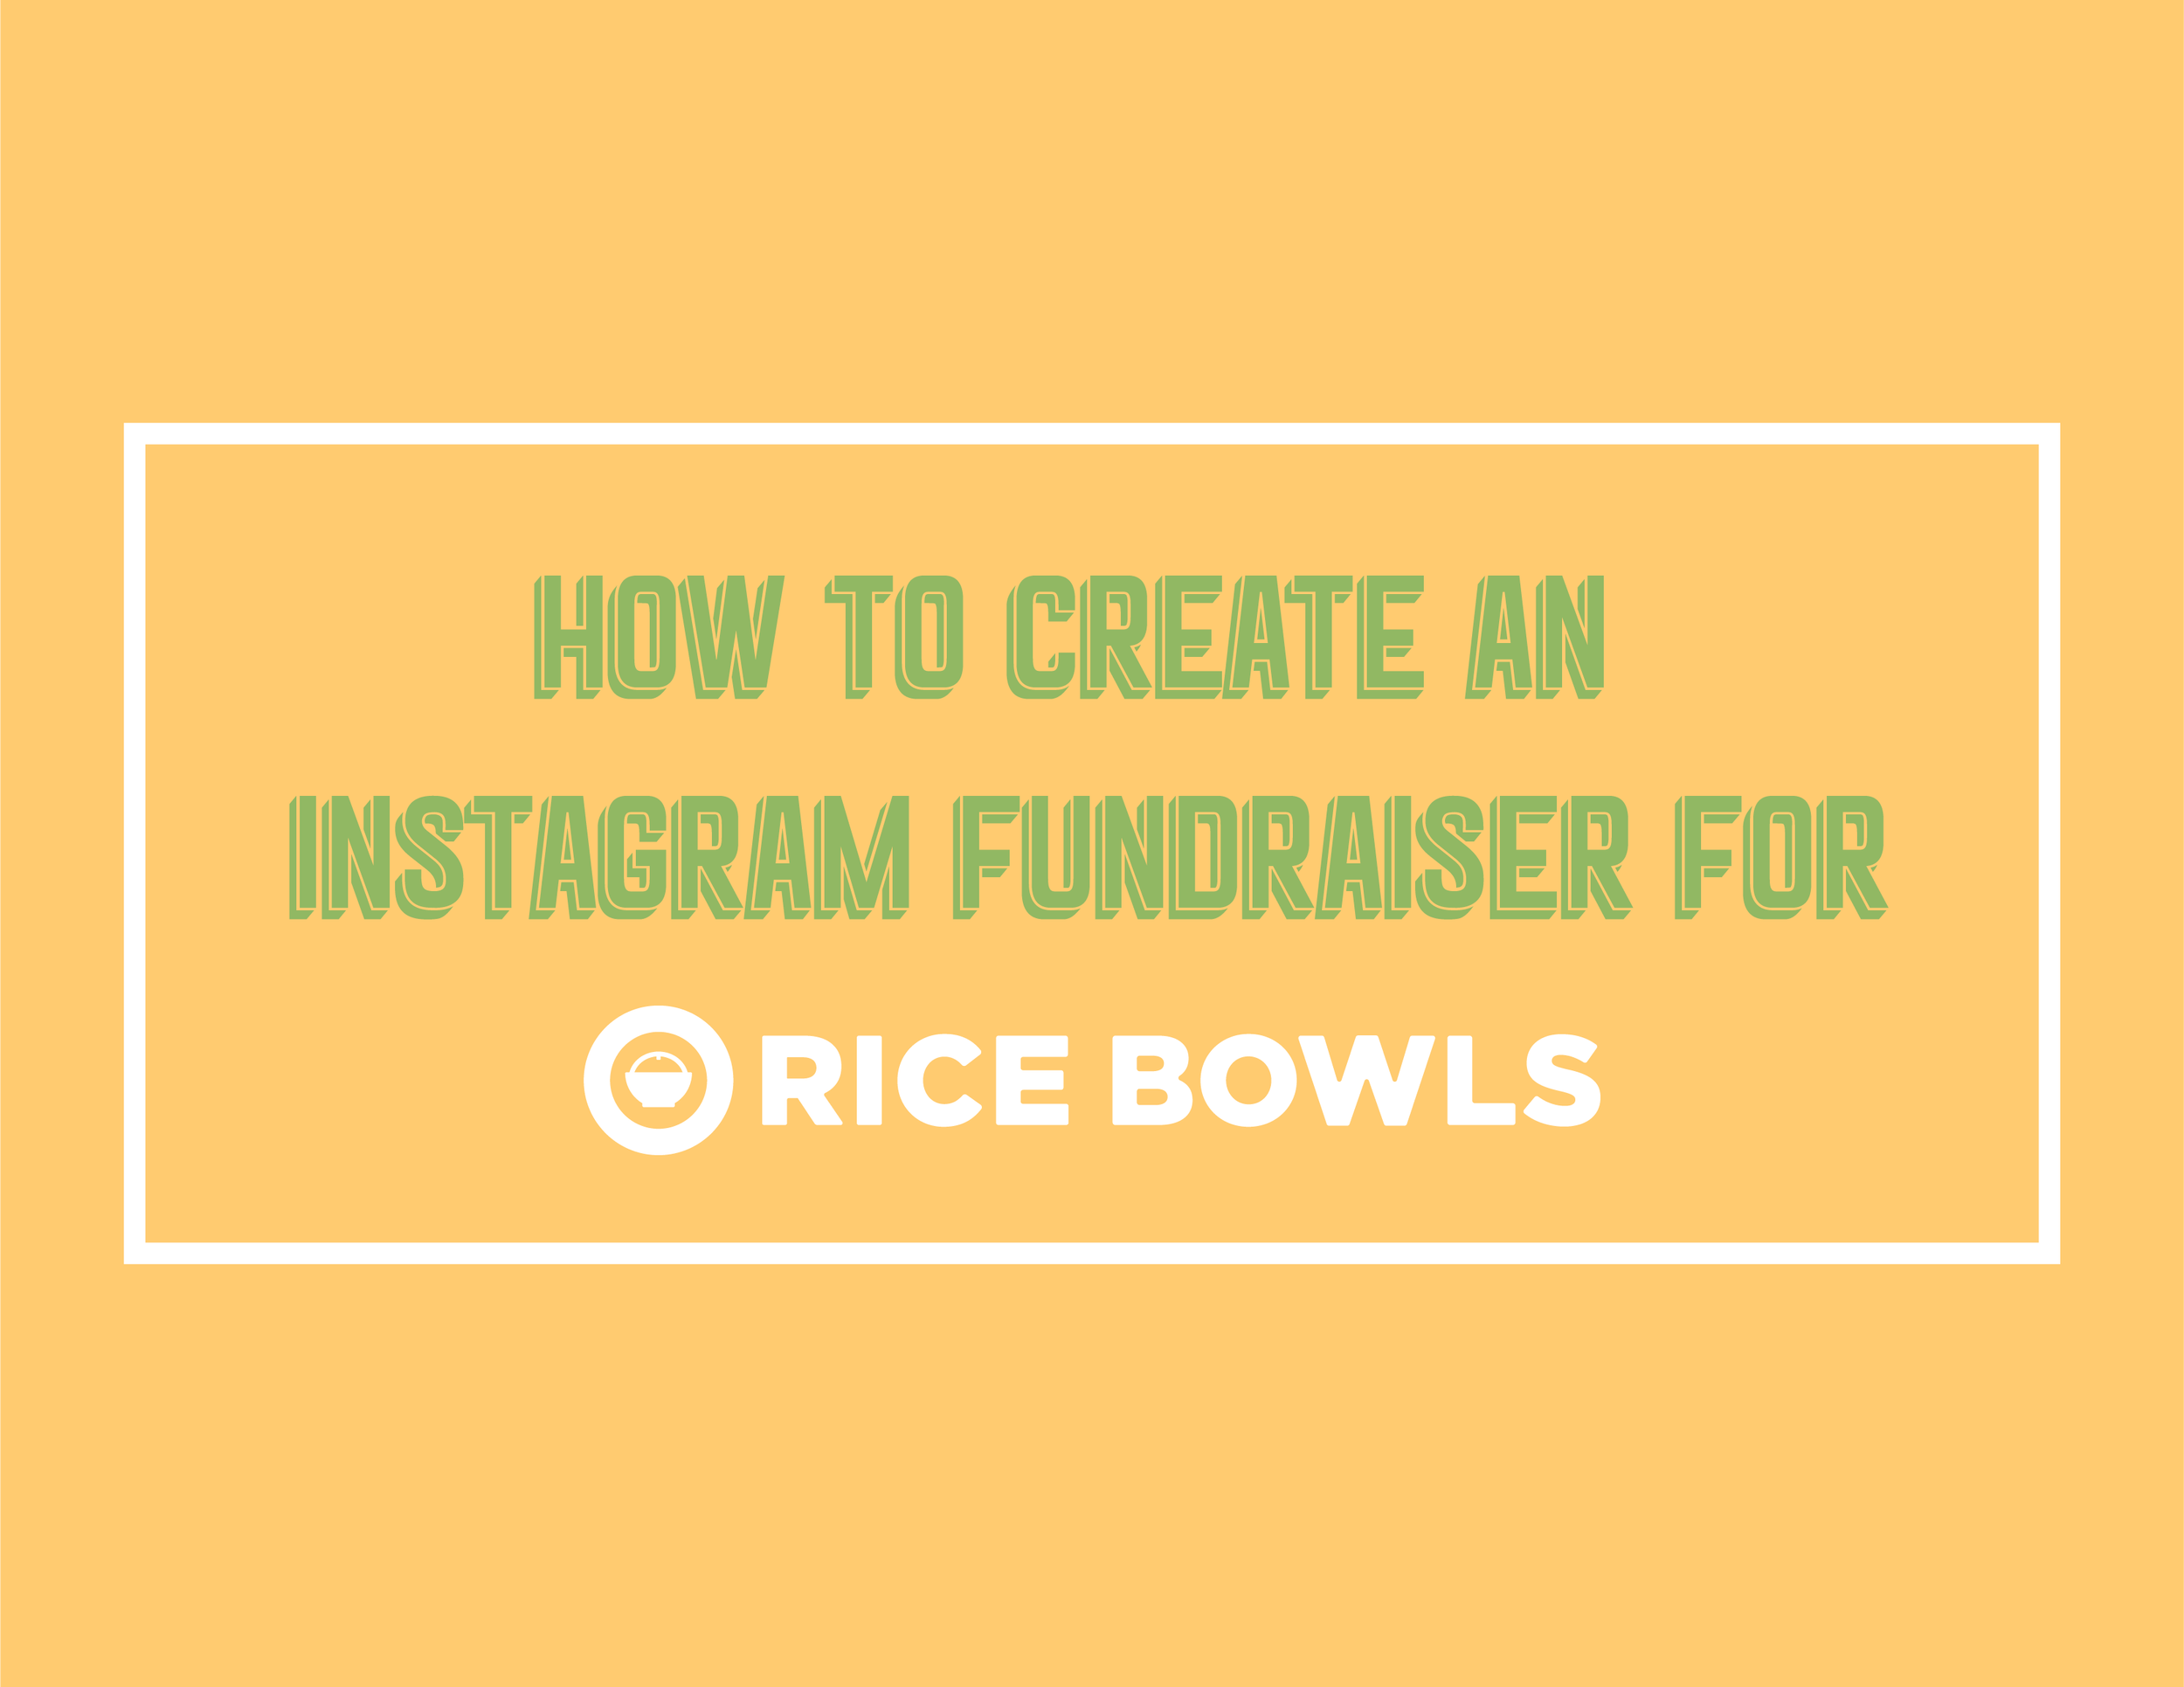 ig-fundraiser-guide-01.png